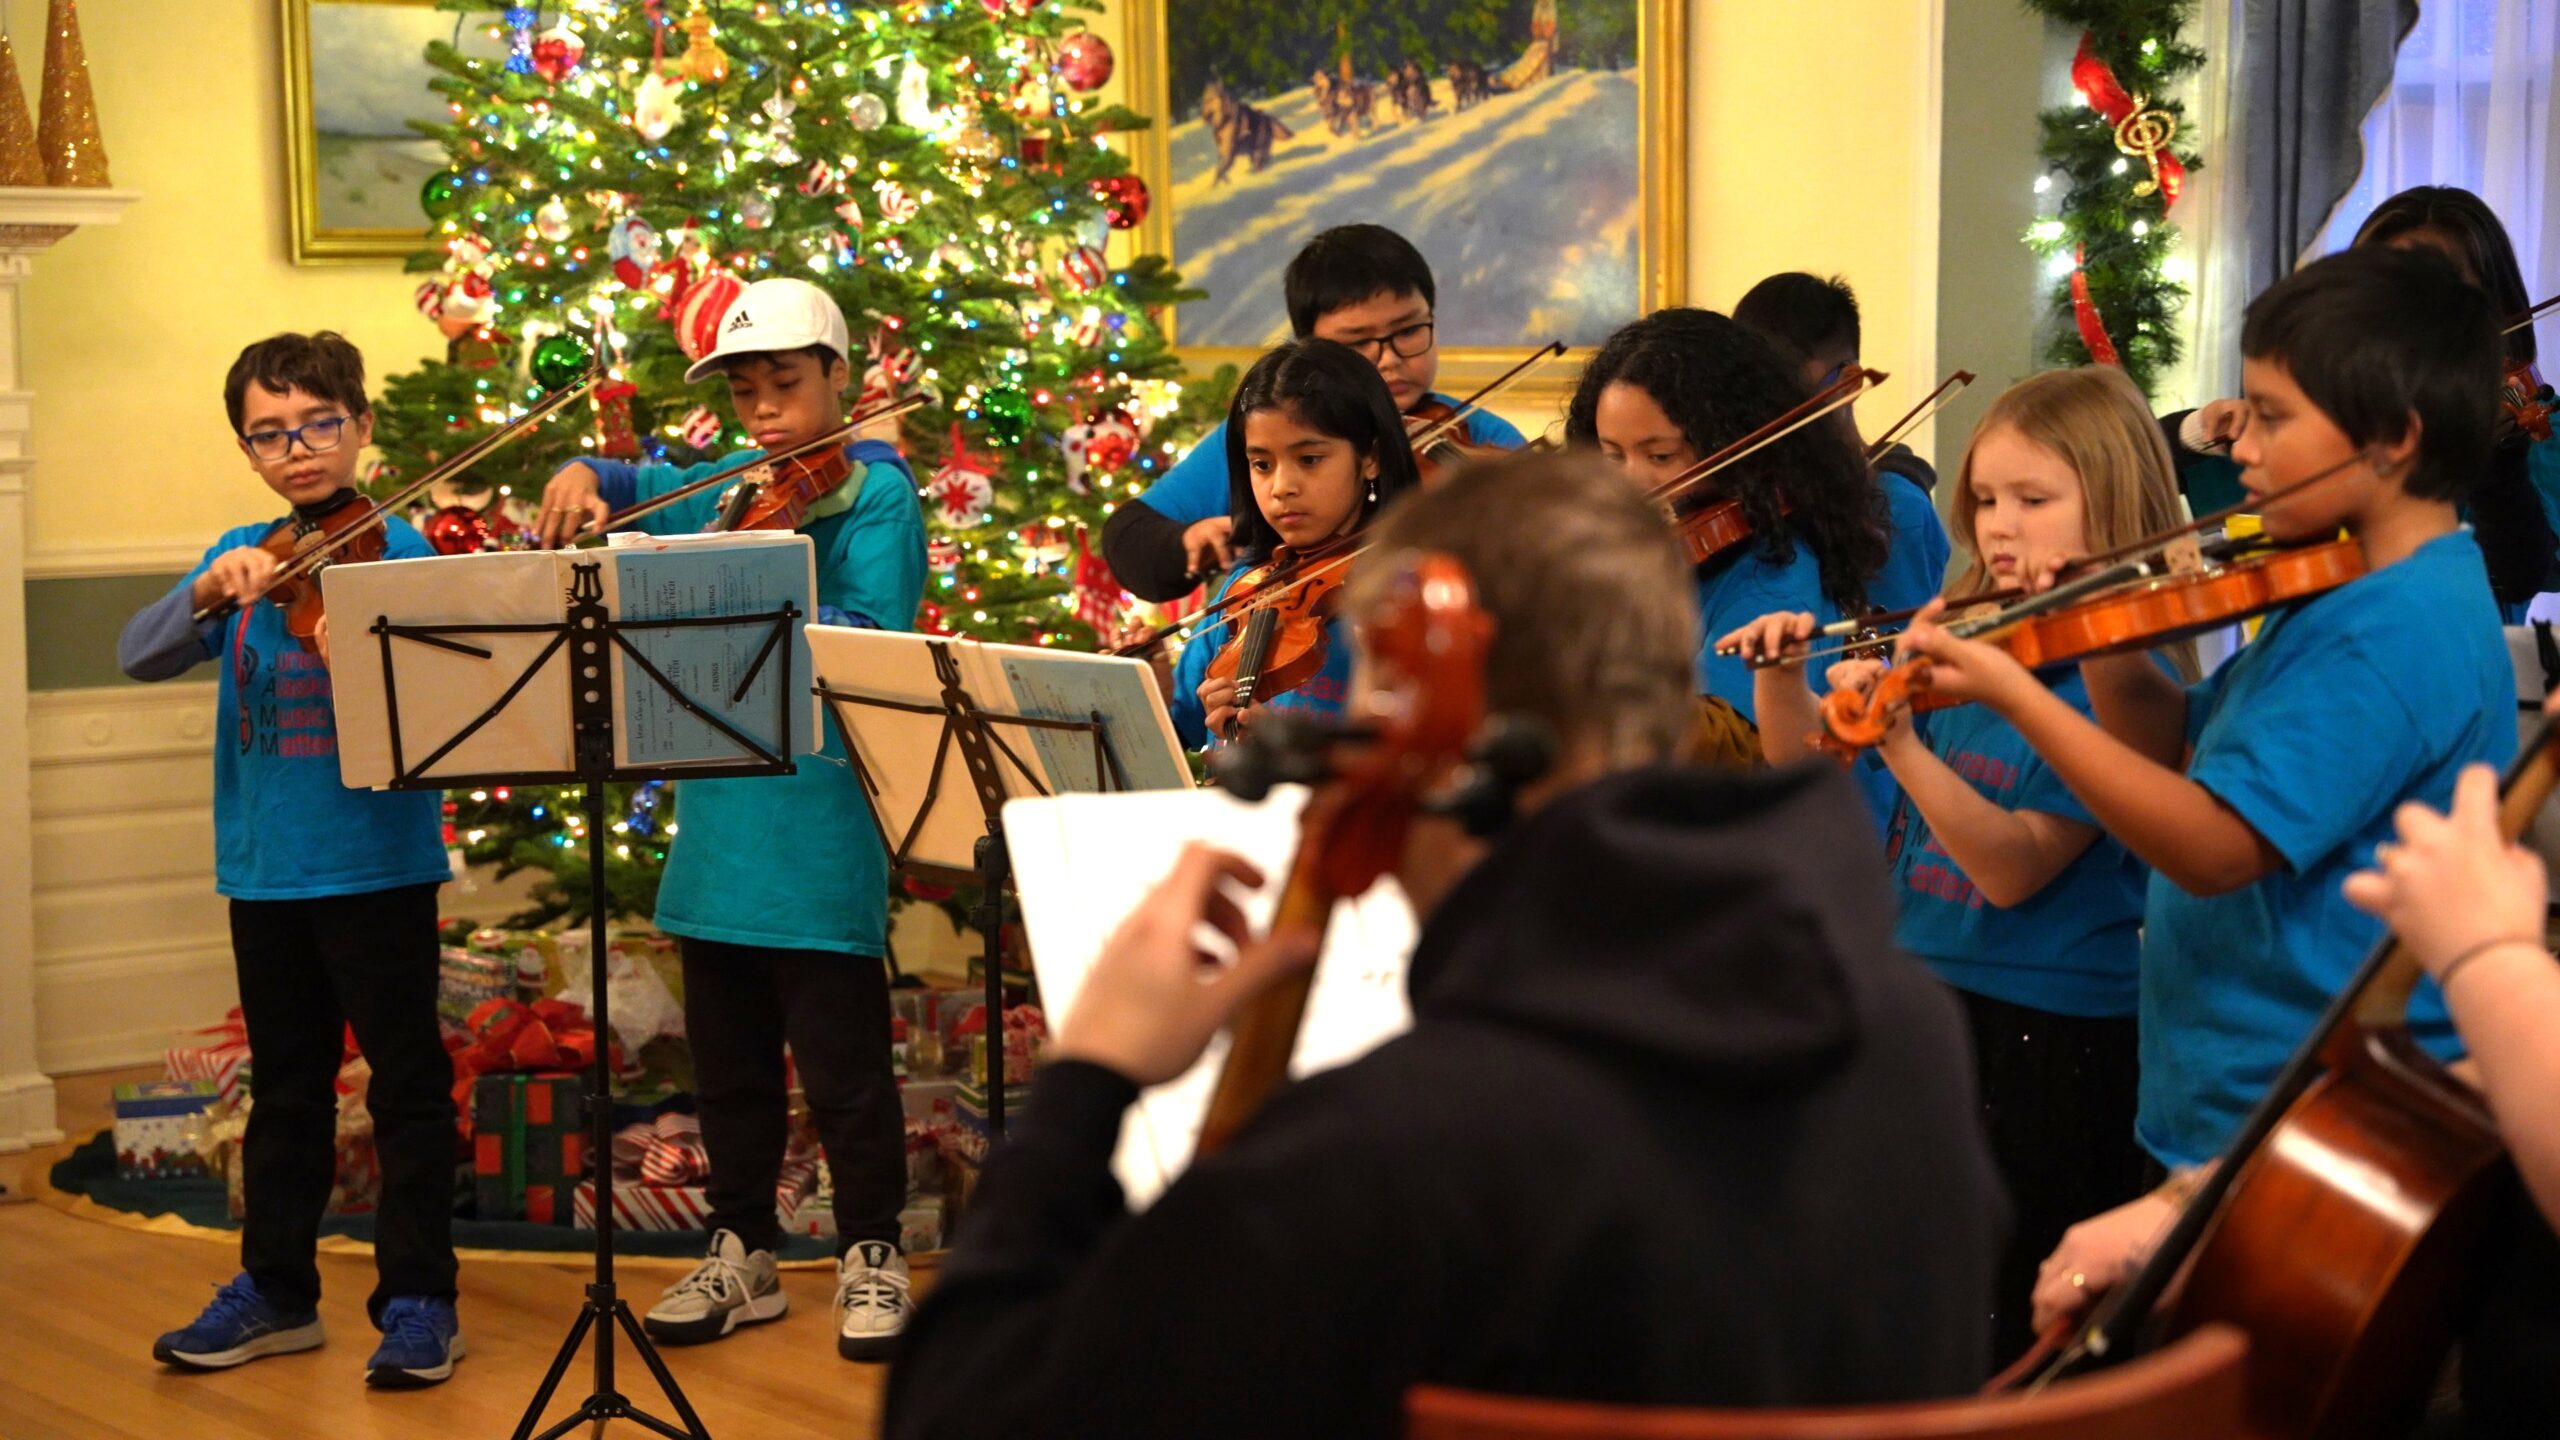 Children playing string instruments in front of Christmas tree